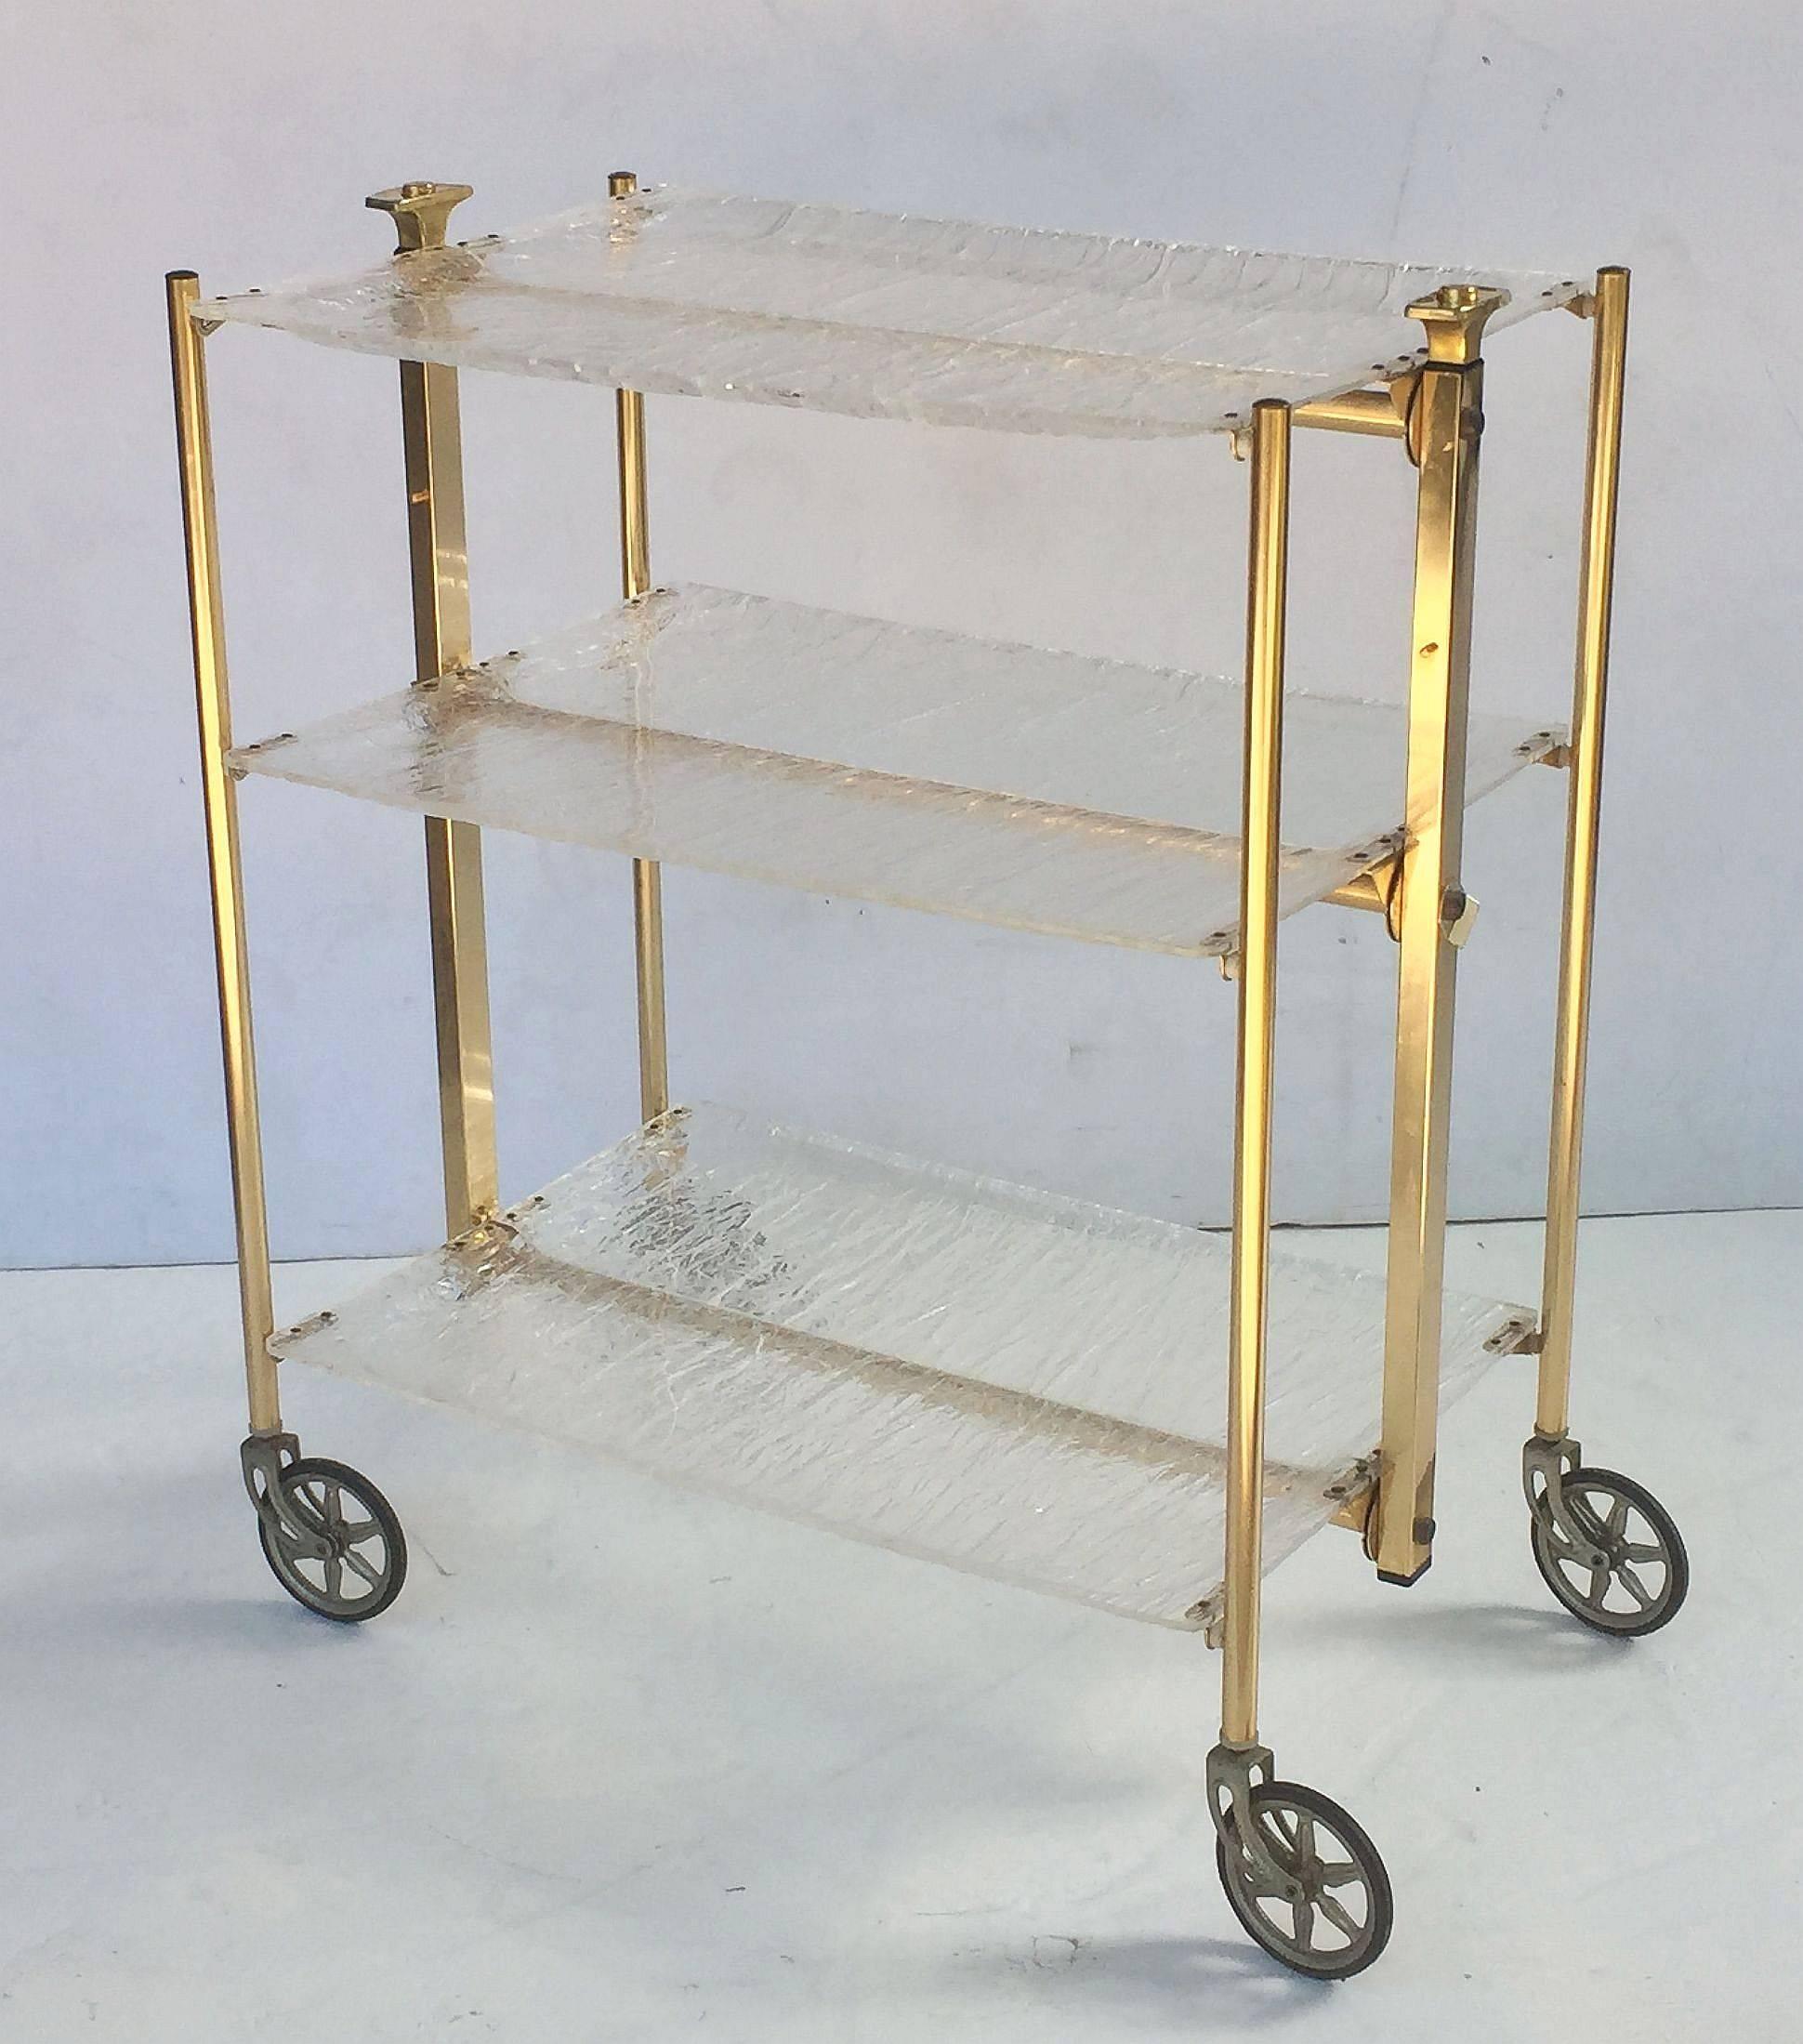 A handsome French bar cart table or drinks trolley, featuring three tiers of textured acrylic, mounted to four legs with rolling casters.
The cart is lightweight and collapsible for storage by pressing a button.

Makes a great side or occasional